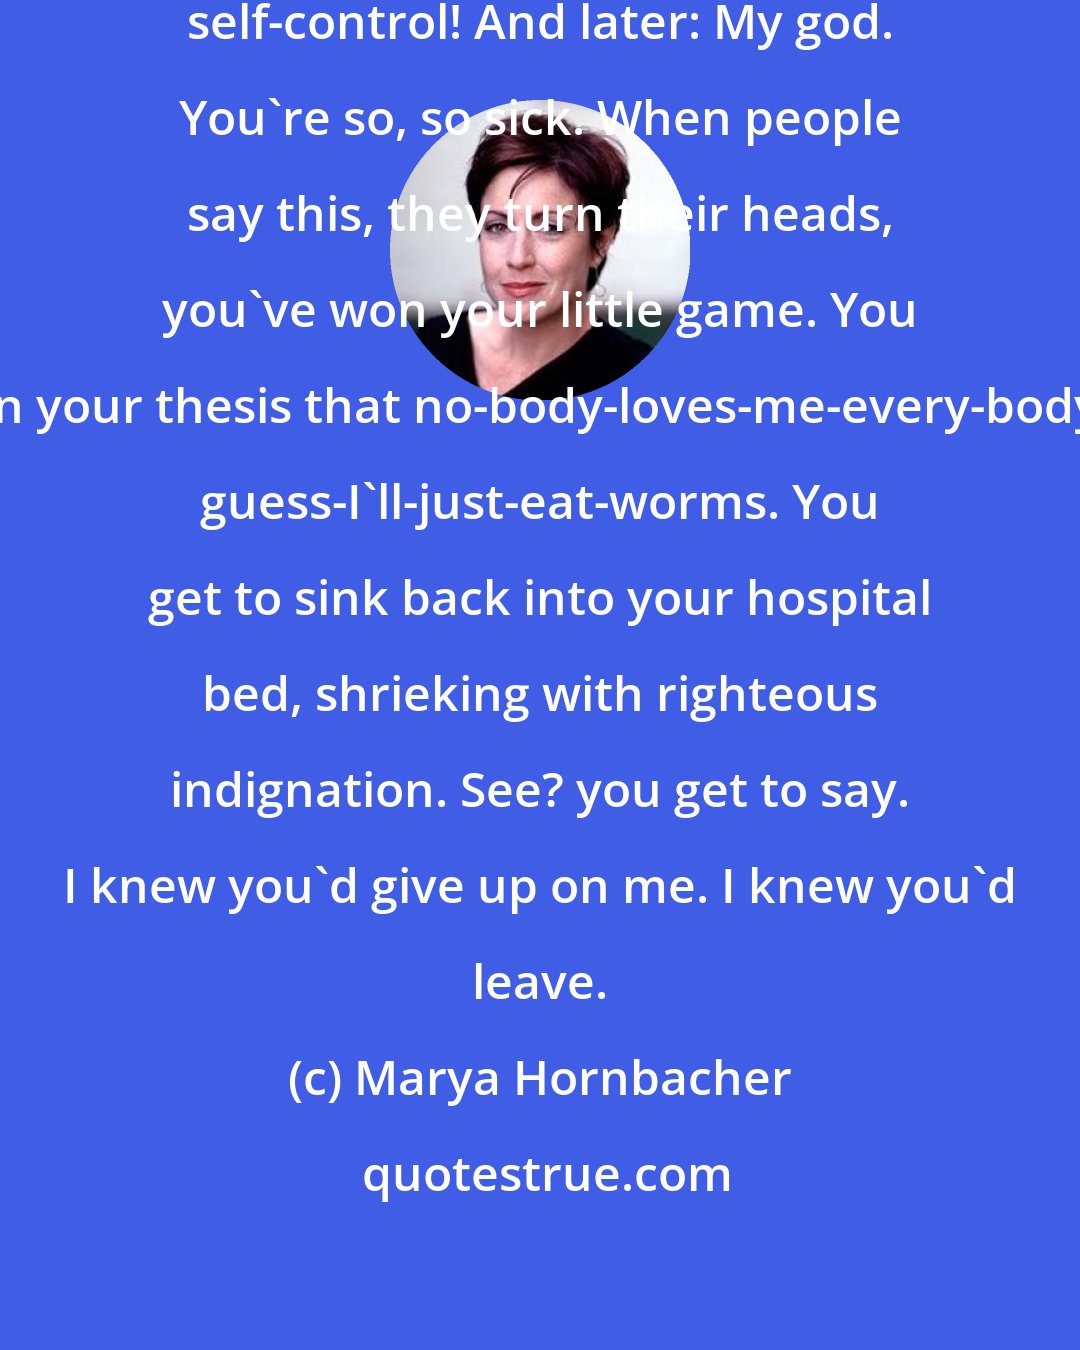 Marya Hornbacher: My god! people say. You have so much self-control! And later: My god. You're so, so sick. When people say this, they turn their heads, you've won your little game. You have proven your thesis that no-body-loves-me-every-body-hates-me, guess-I'll-just-eat-worms. You get to sink back into your hospital bed, shrieking with righteous indignation. See? you get to say. I knew you'd give up on me. I knew you'd leave.